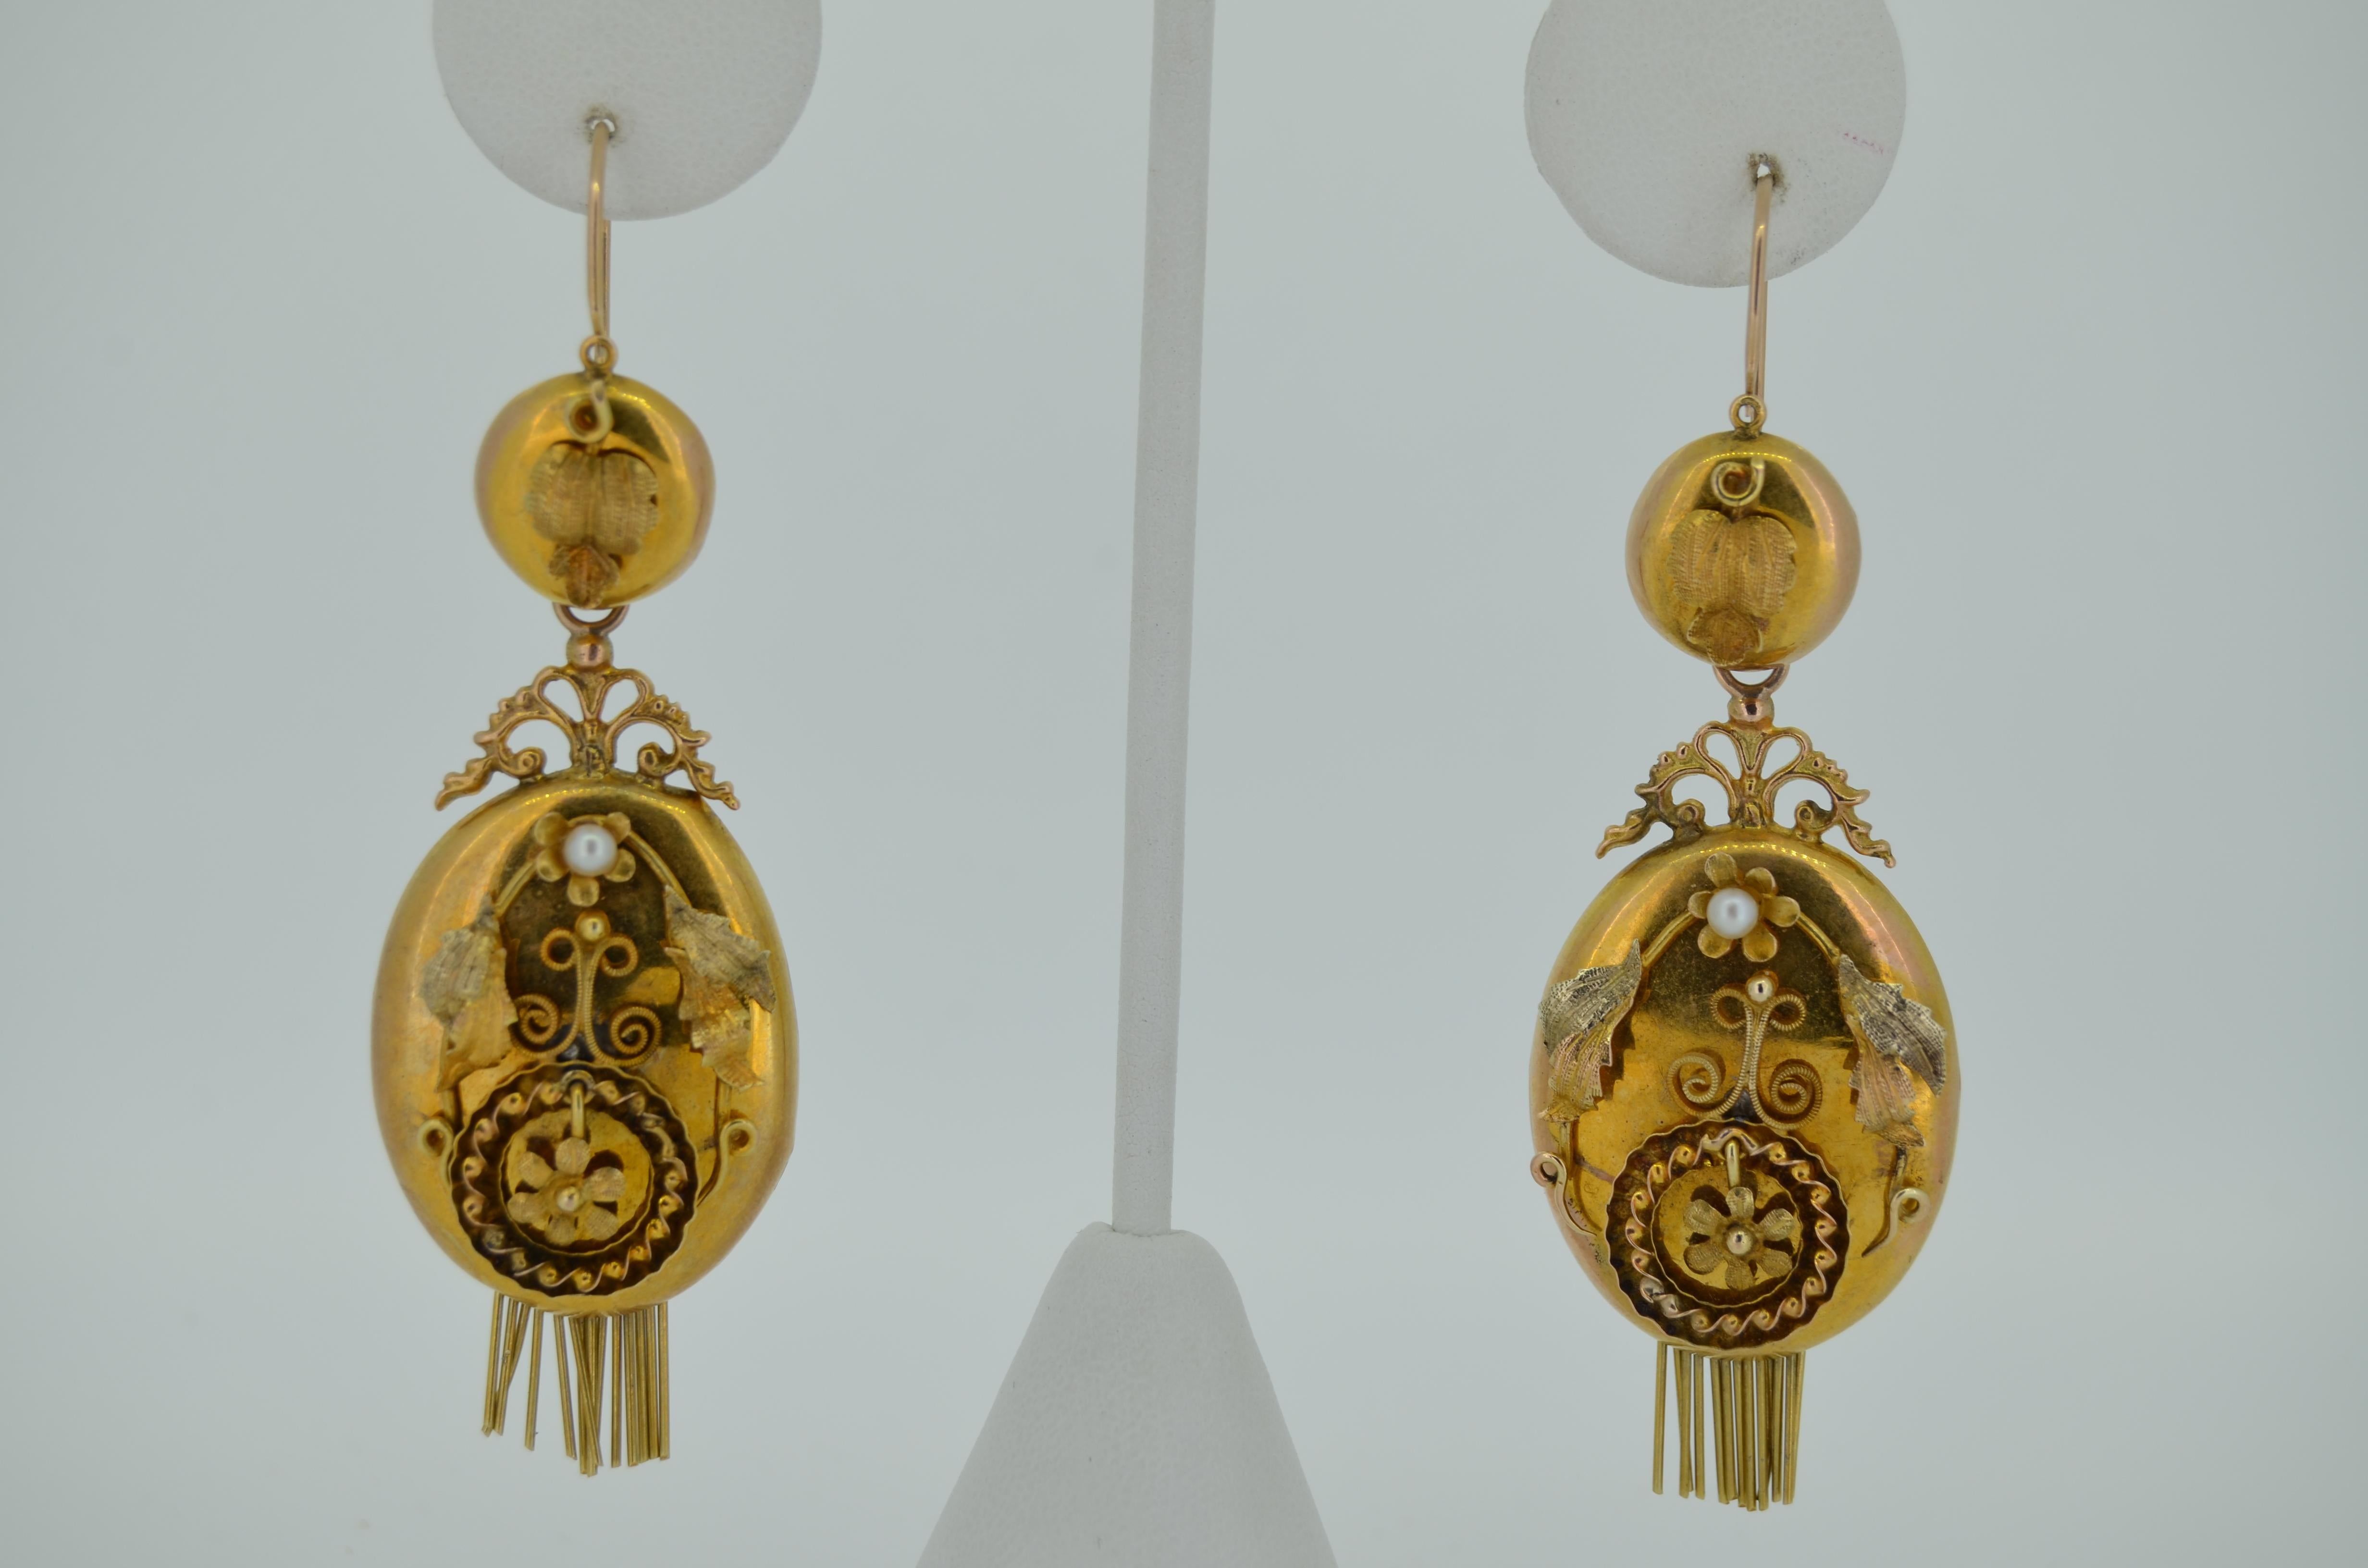 A lovely pair of Original Victorian-era earrings. These earrings date from the late 1800s. They are crafted from 14K Yellow and Rose Gold. The earrings are day and night, meaning you can adorn the ear with the button tops alone or add the massive